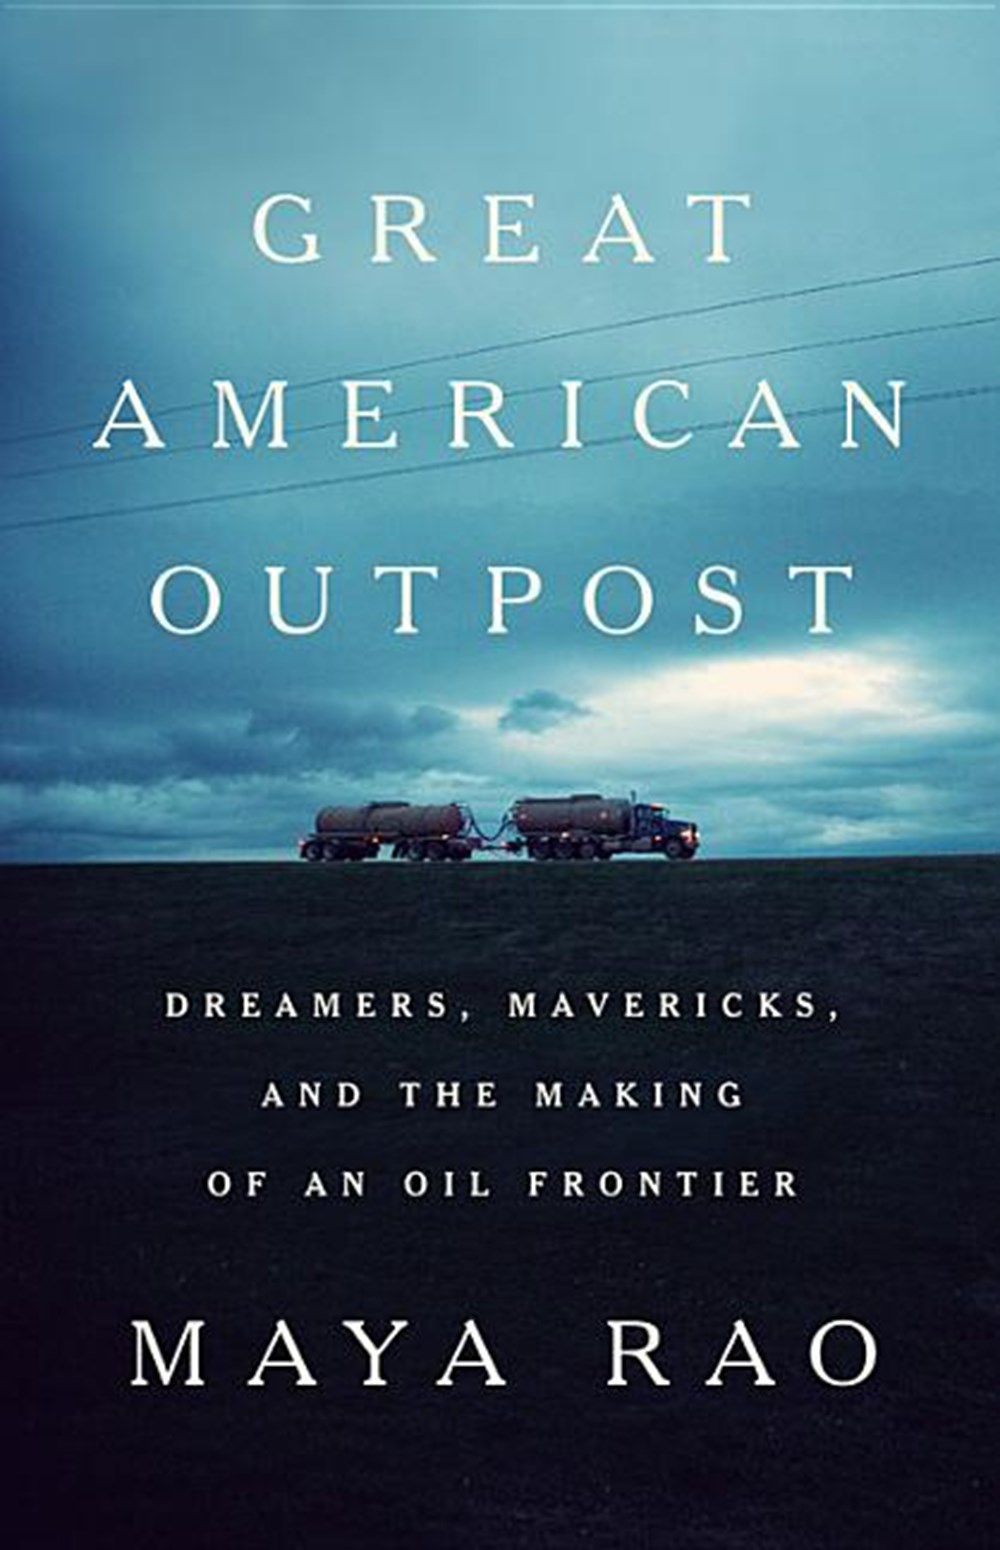 Great American Outpost: Dreamers, Mavericks, and the Making of an Oil Frontier